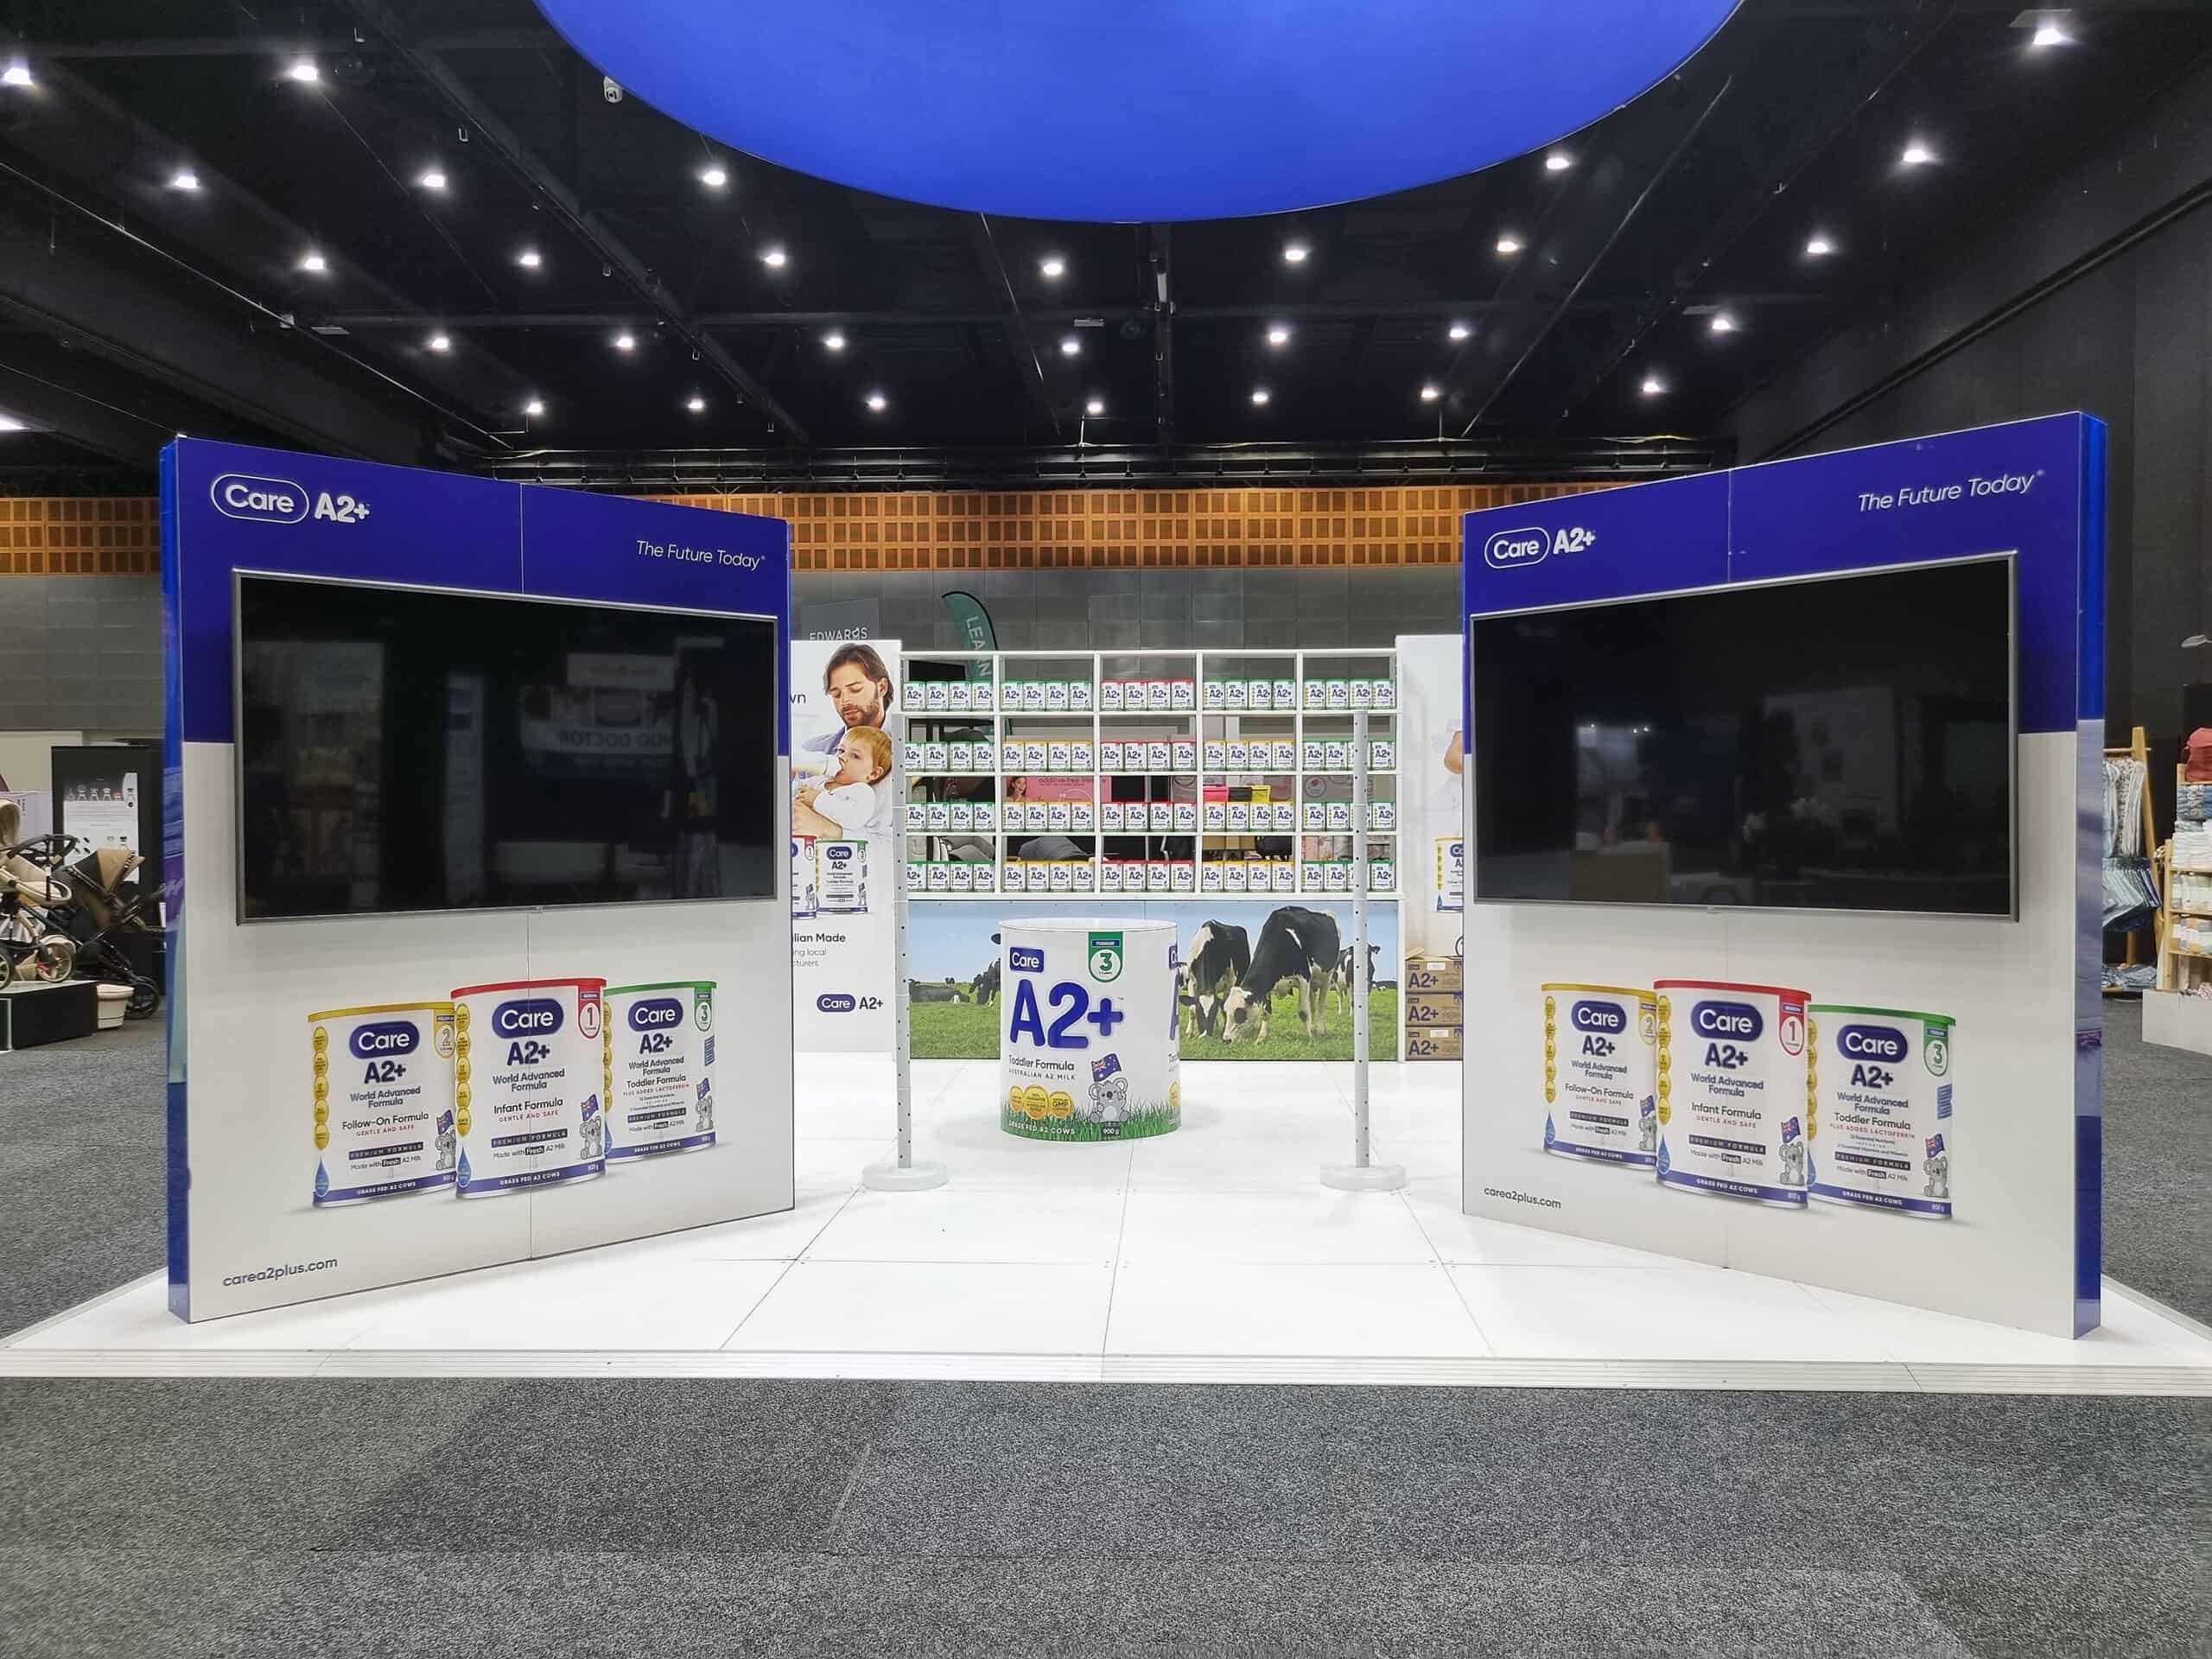 pbc baby expo hire and rental services for exhibitions Sydney a2 milk display